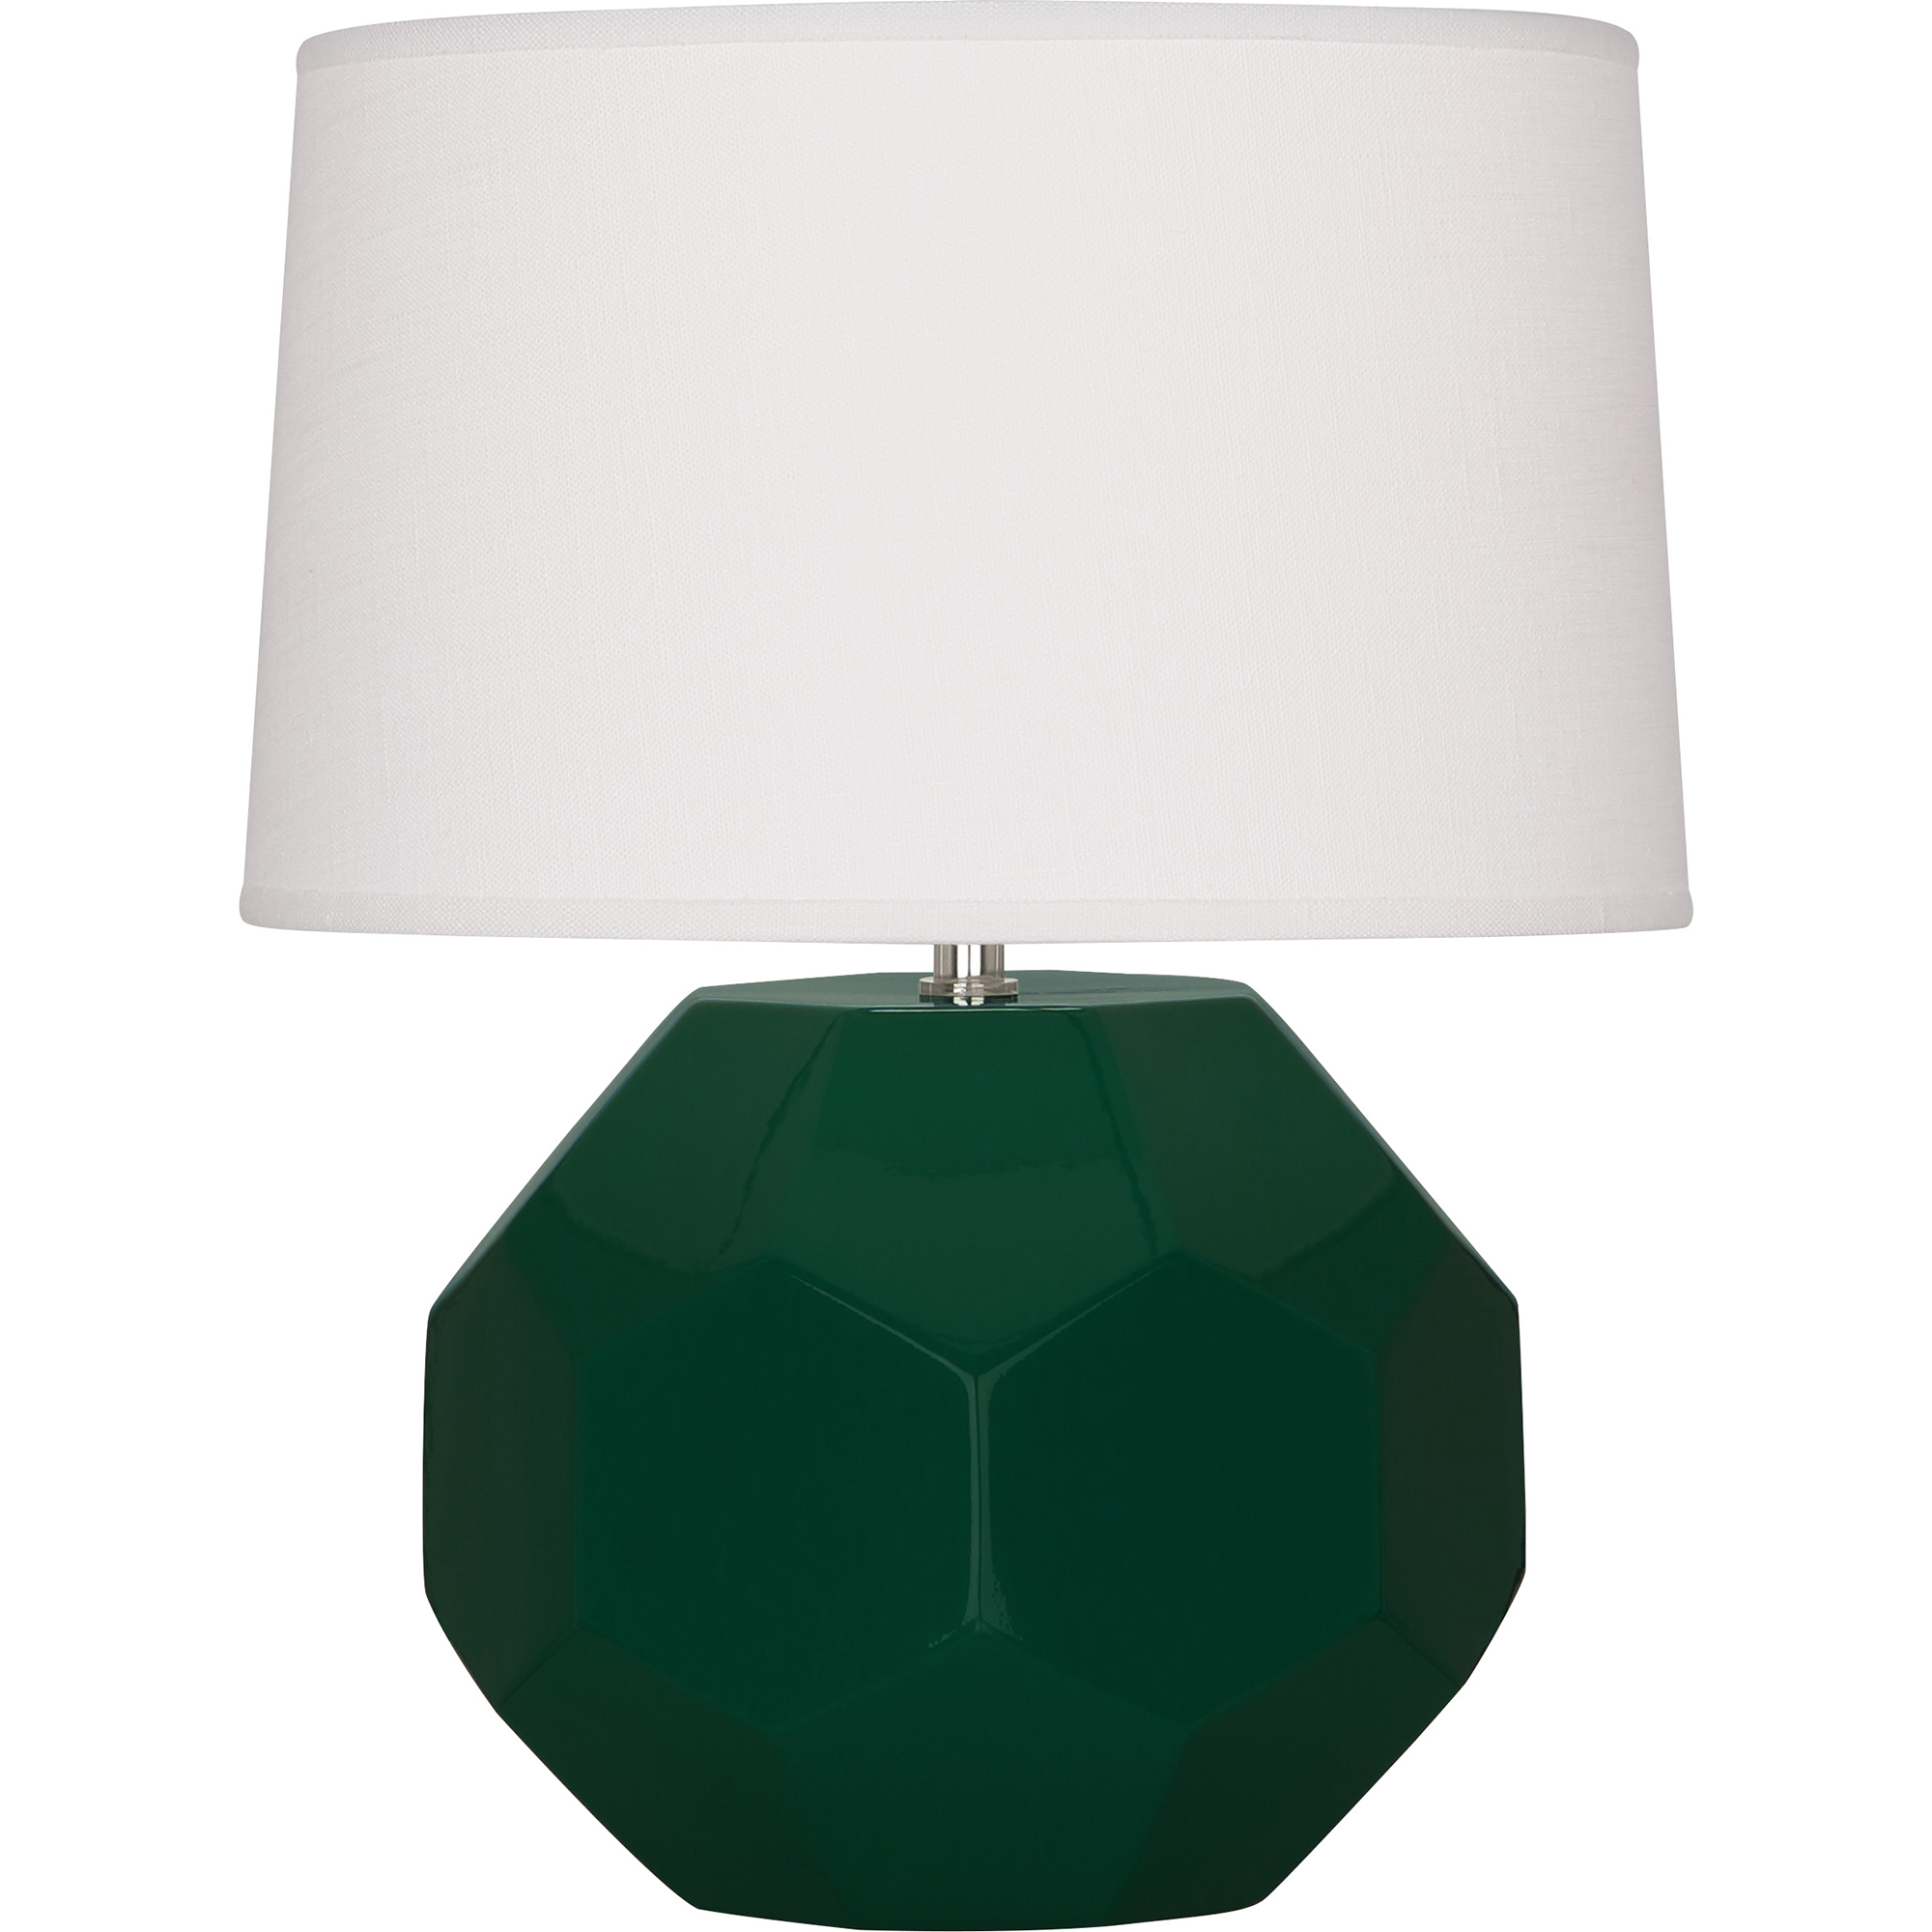 Franklin Accent Lamp Style #JU02